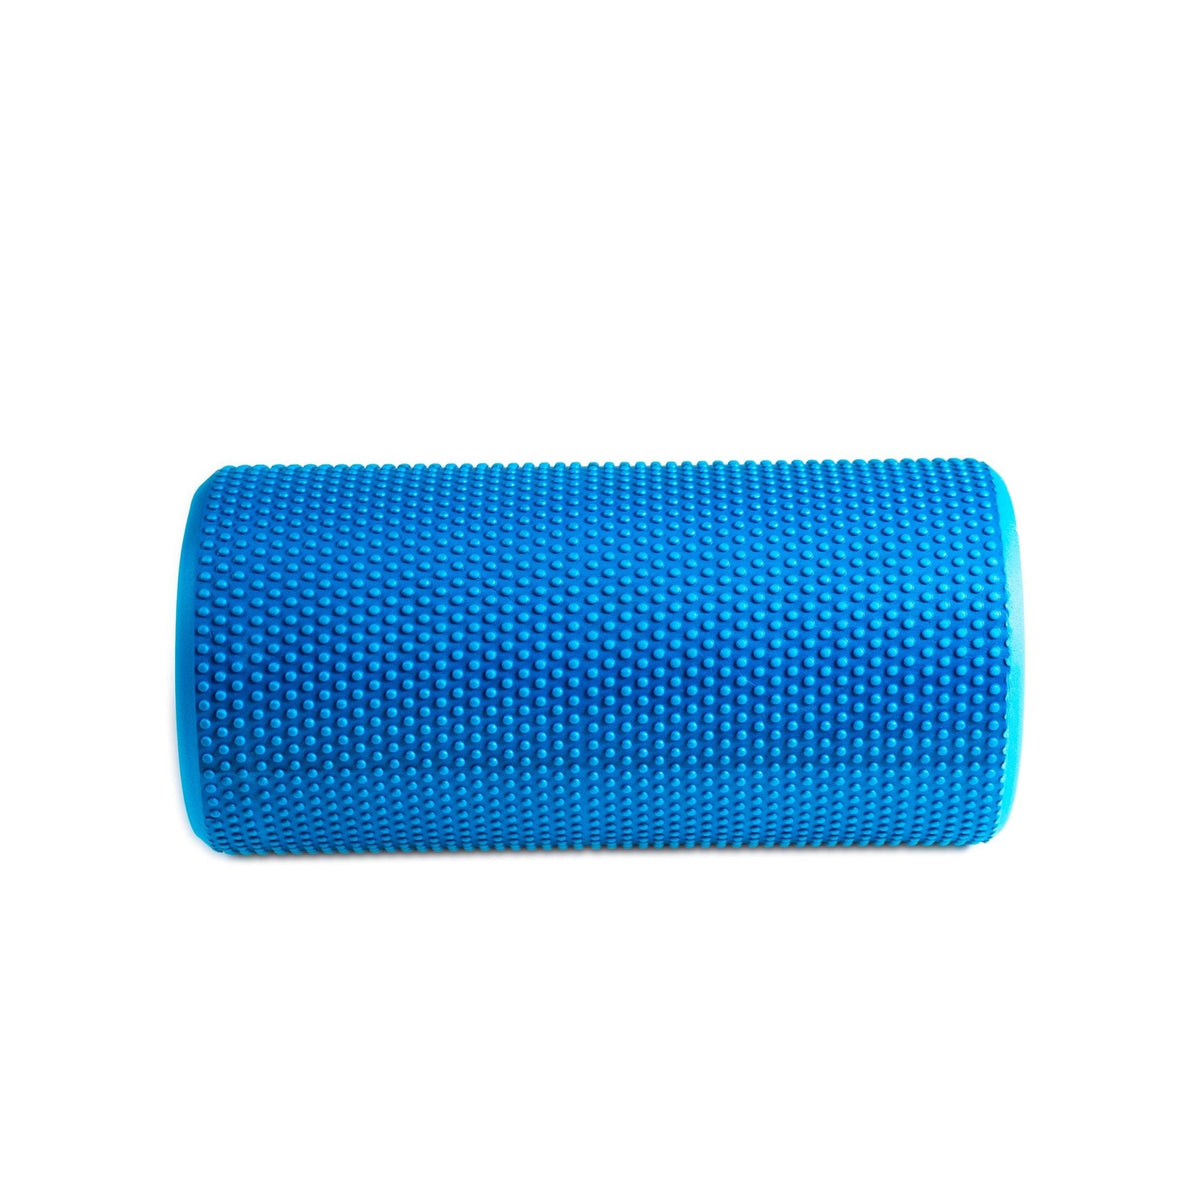 FitWay Equip. EVA Foam Rollers 30cm - Fitness Experience